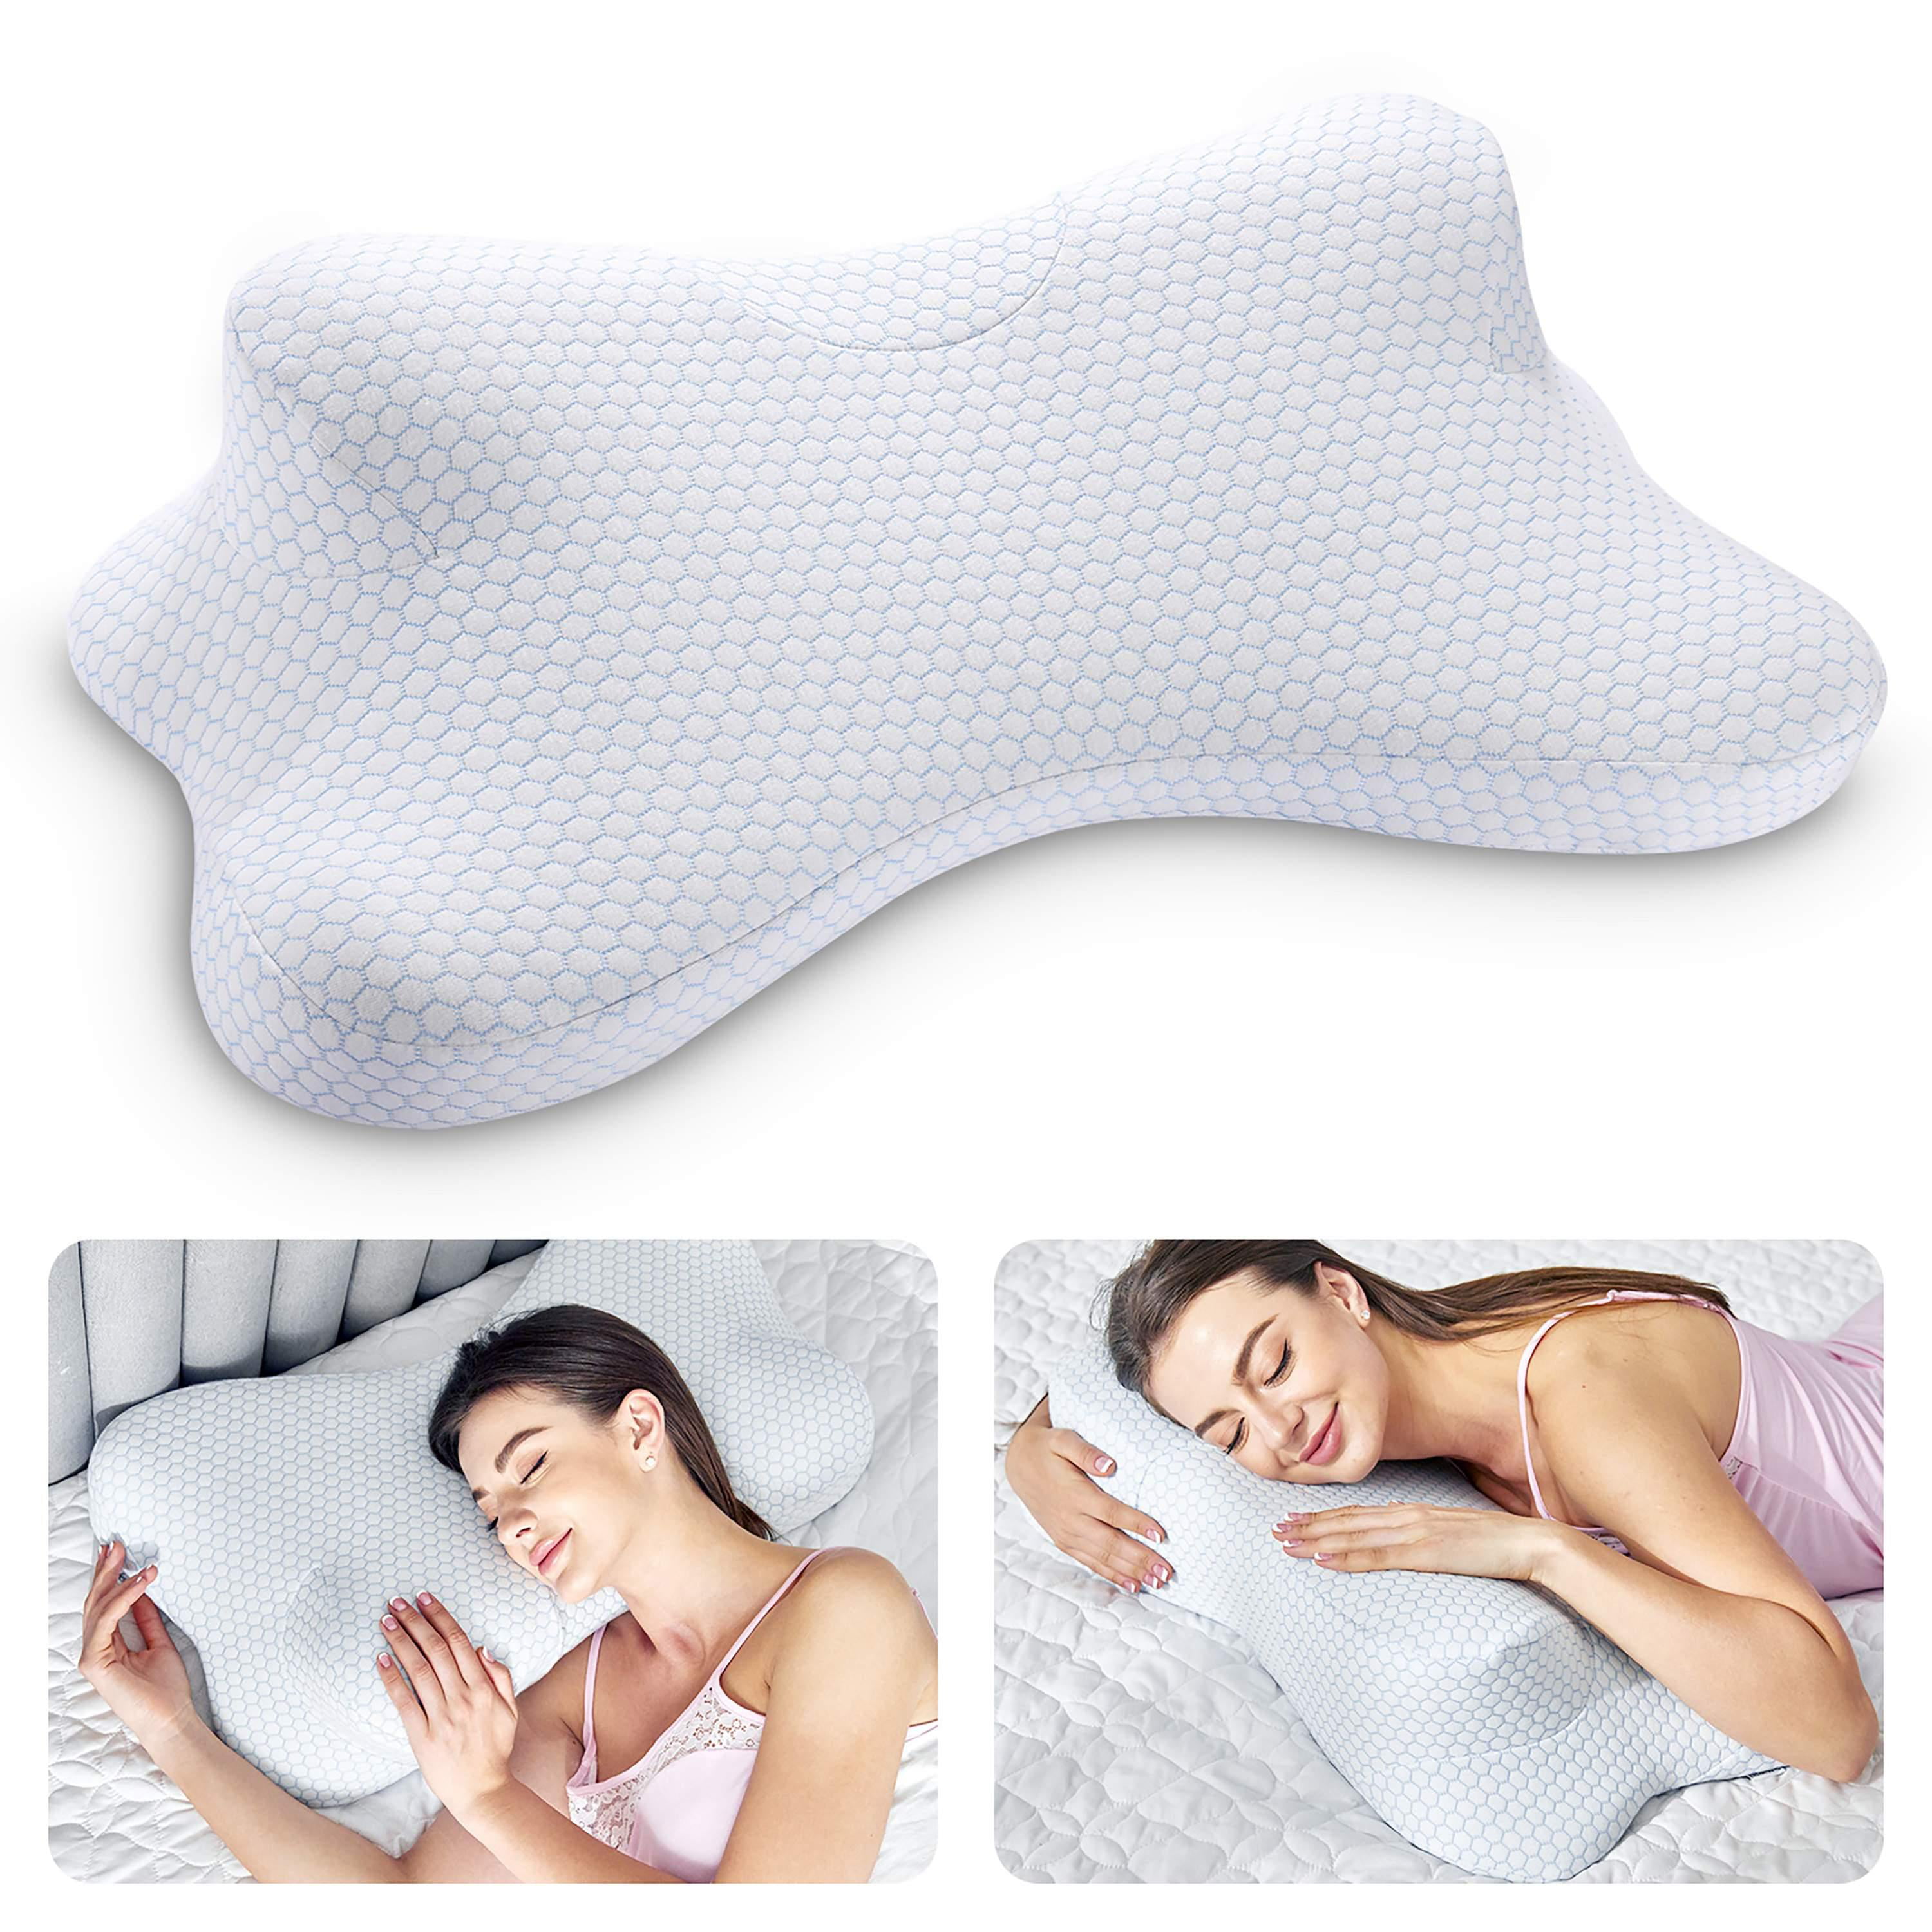 Cervical Neck Roll Pillow Cylinder Round Cushion Bolster Support for Sleeping Memory Foam Pillow for Neck Spine - Breathable Hypoallergenic and Comfortable -Supports Effectively, Lumbar Traction